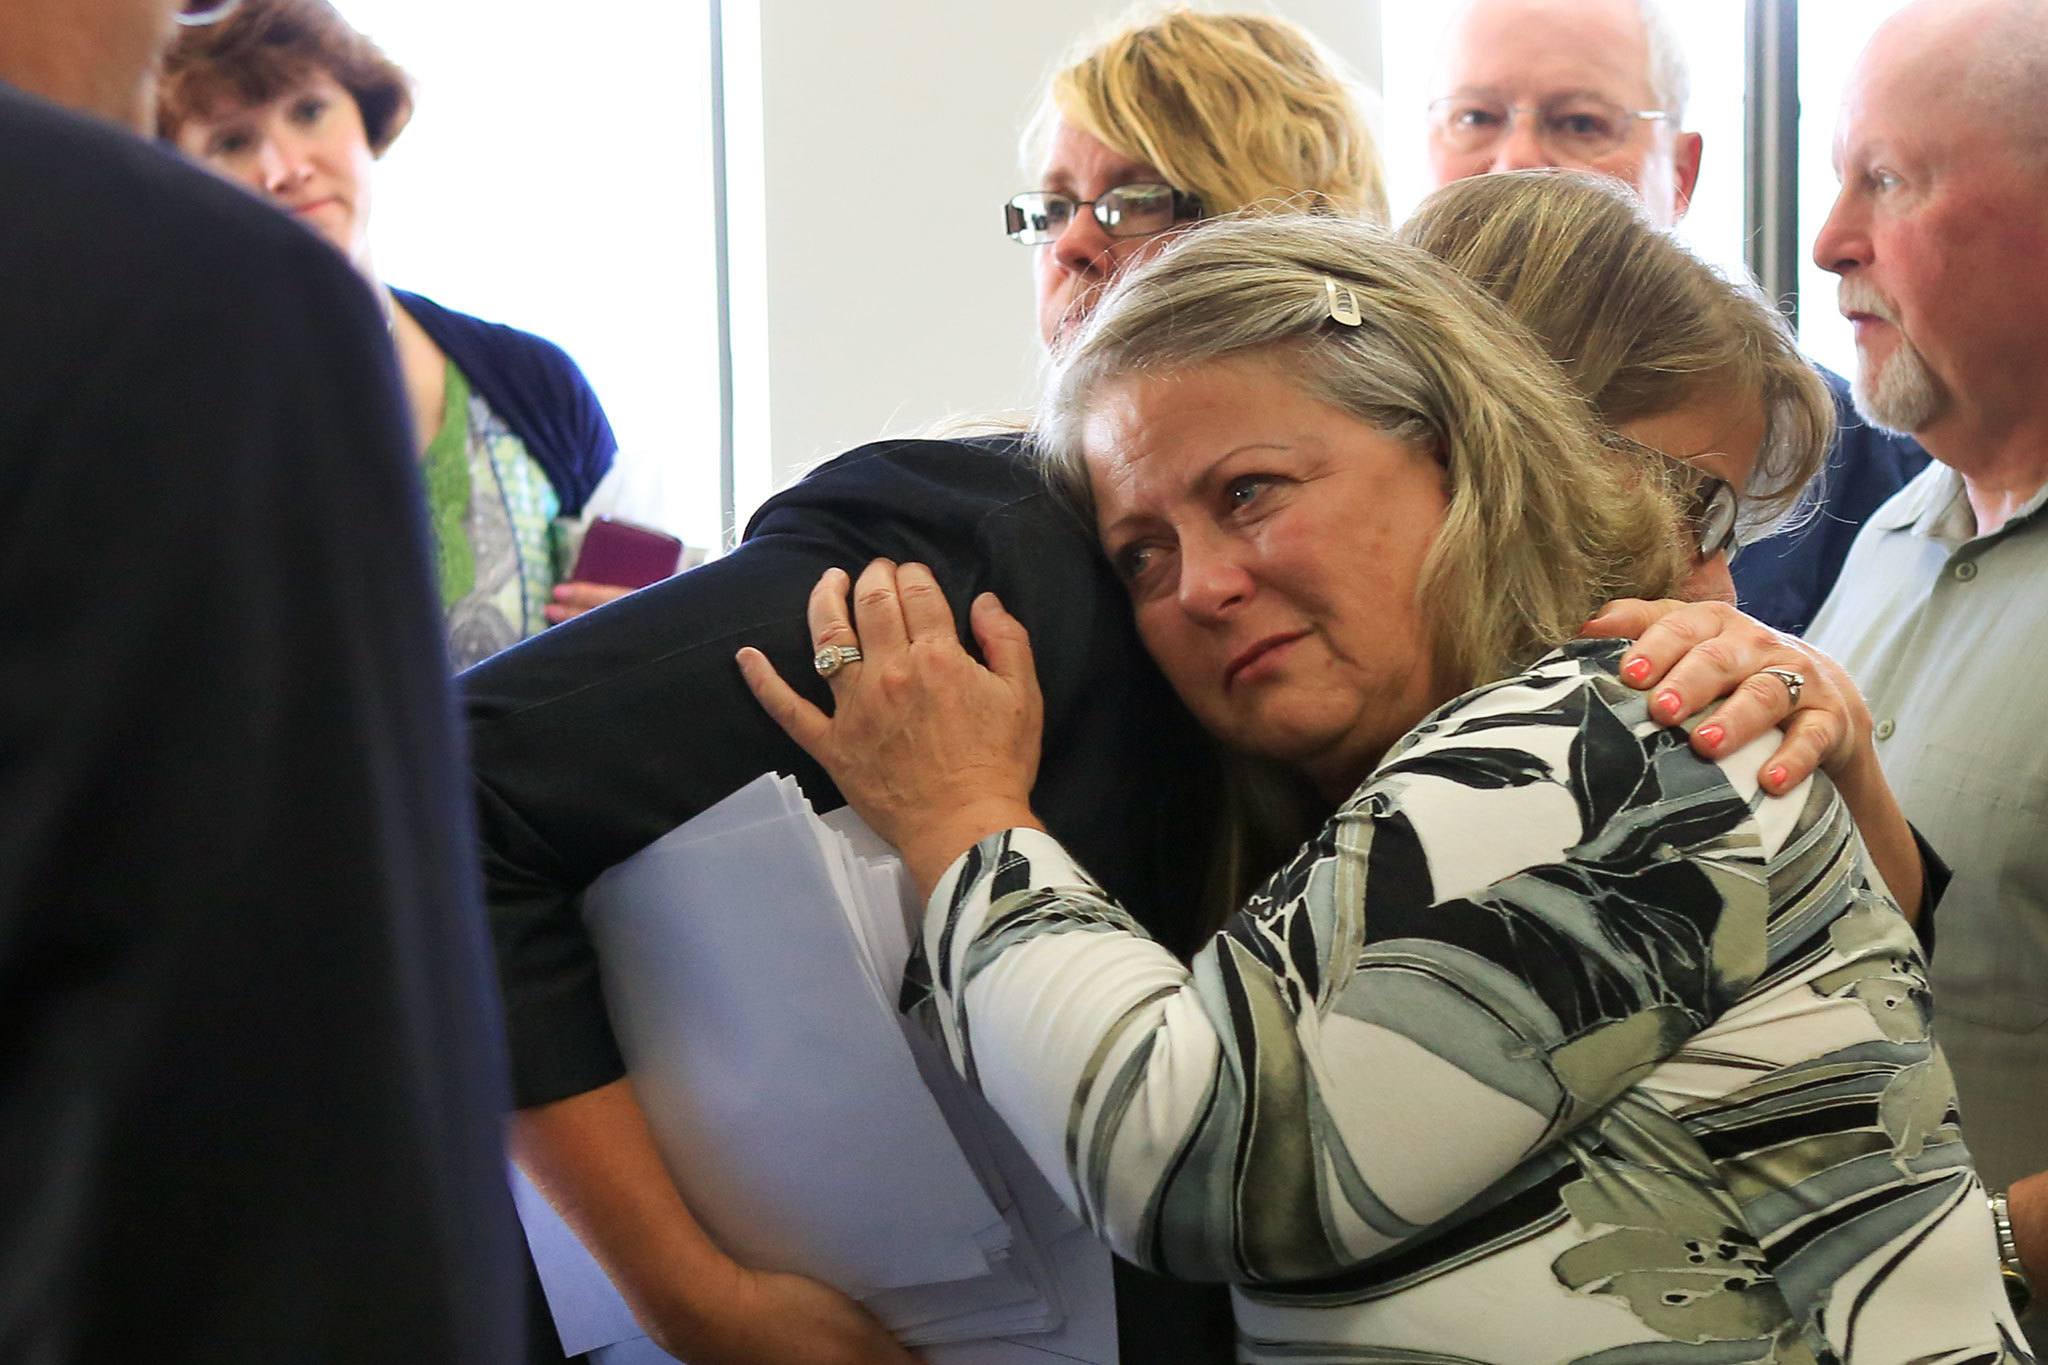 Snohomish County deputy prosecutor Julie Mohr hugs Denise Webber, Rachel Burkheimer’s mother, on Wednesday afternoon at the county courthouse in Everett. (Kevin Clark / The Herald)